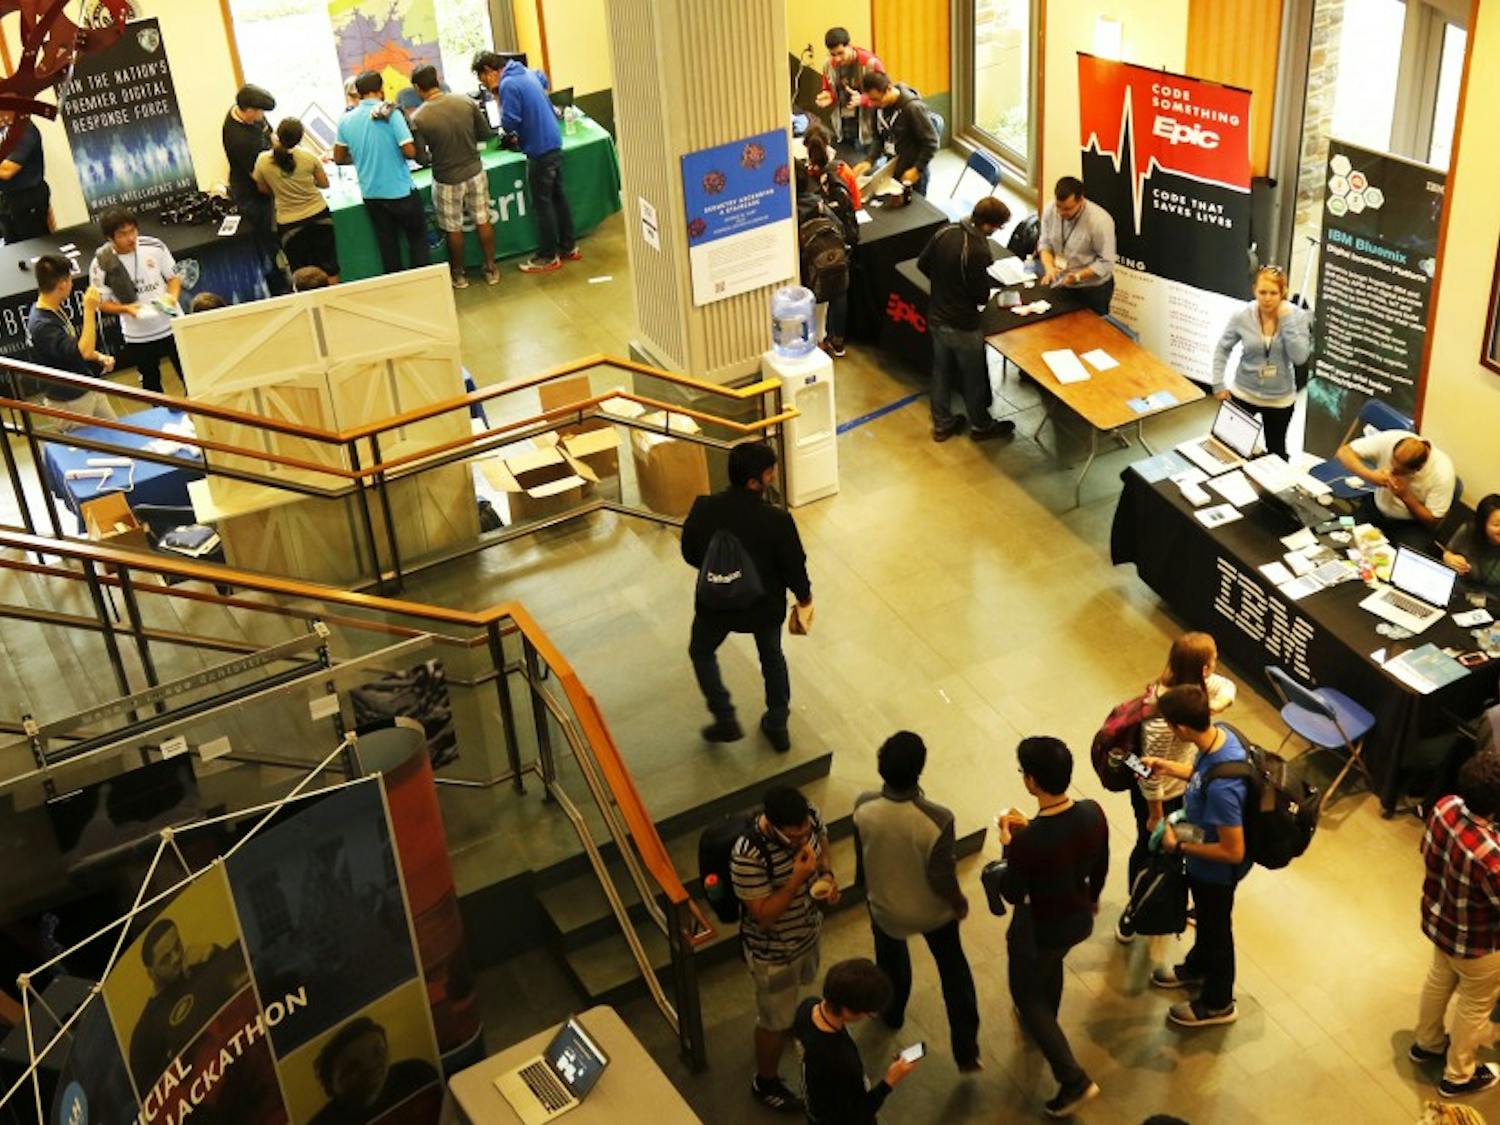 Teams of students from across the country gathered this weekend for the third annual HackDuke technology competition.